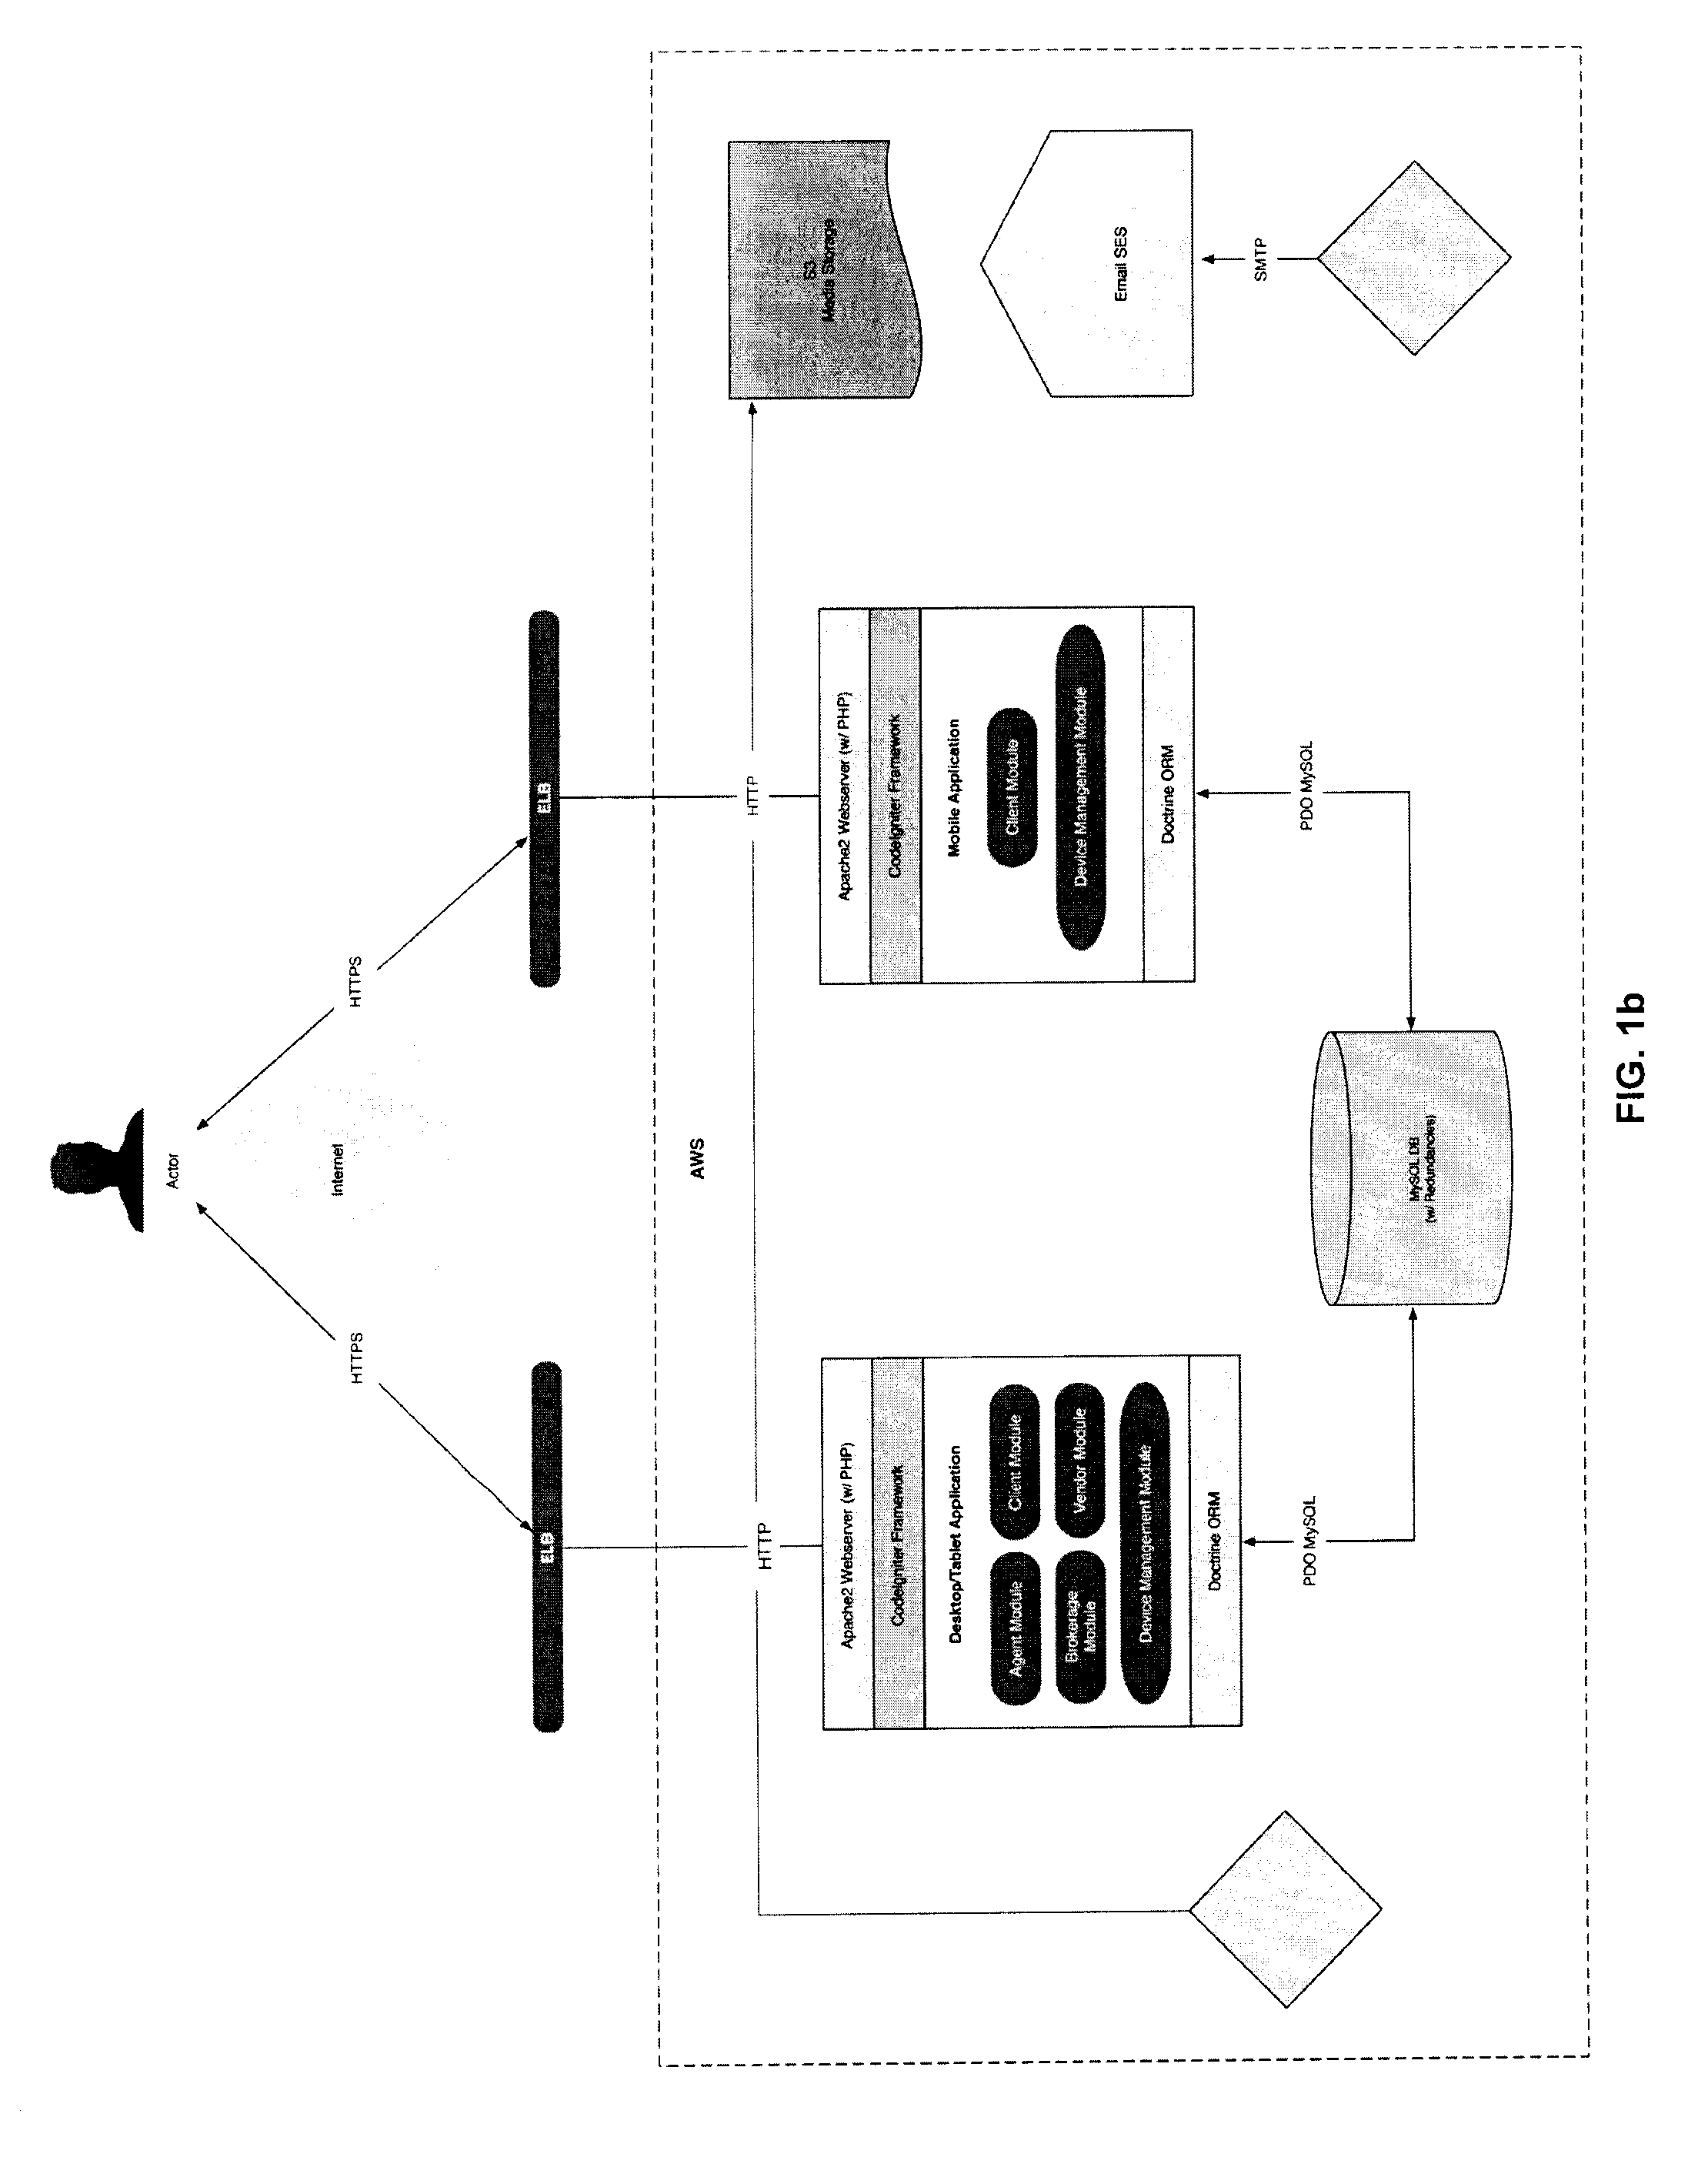 Computer system and method for providing a multi-user transaction platform accessible using a mobile device